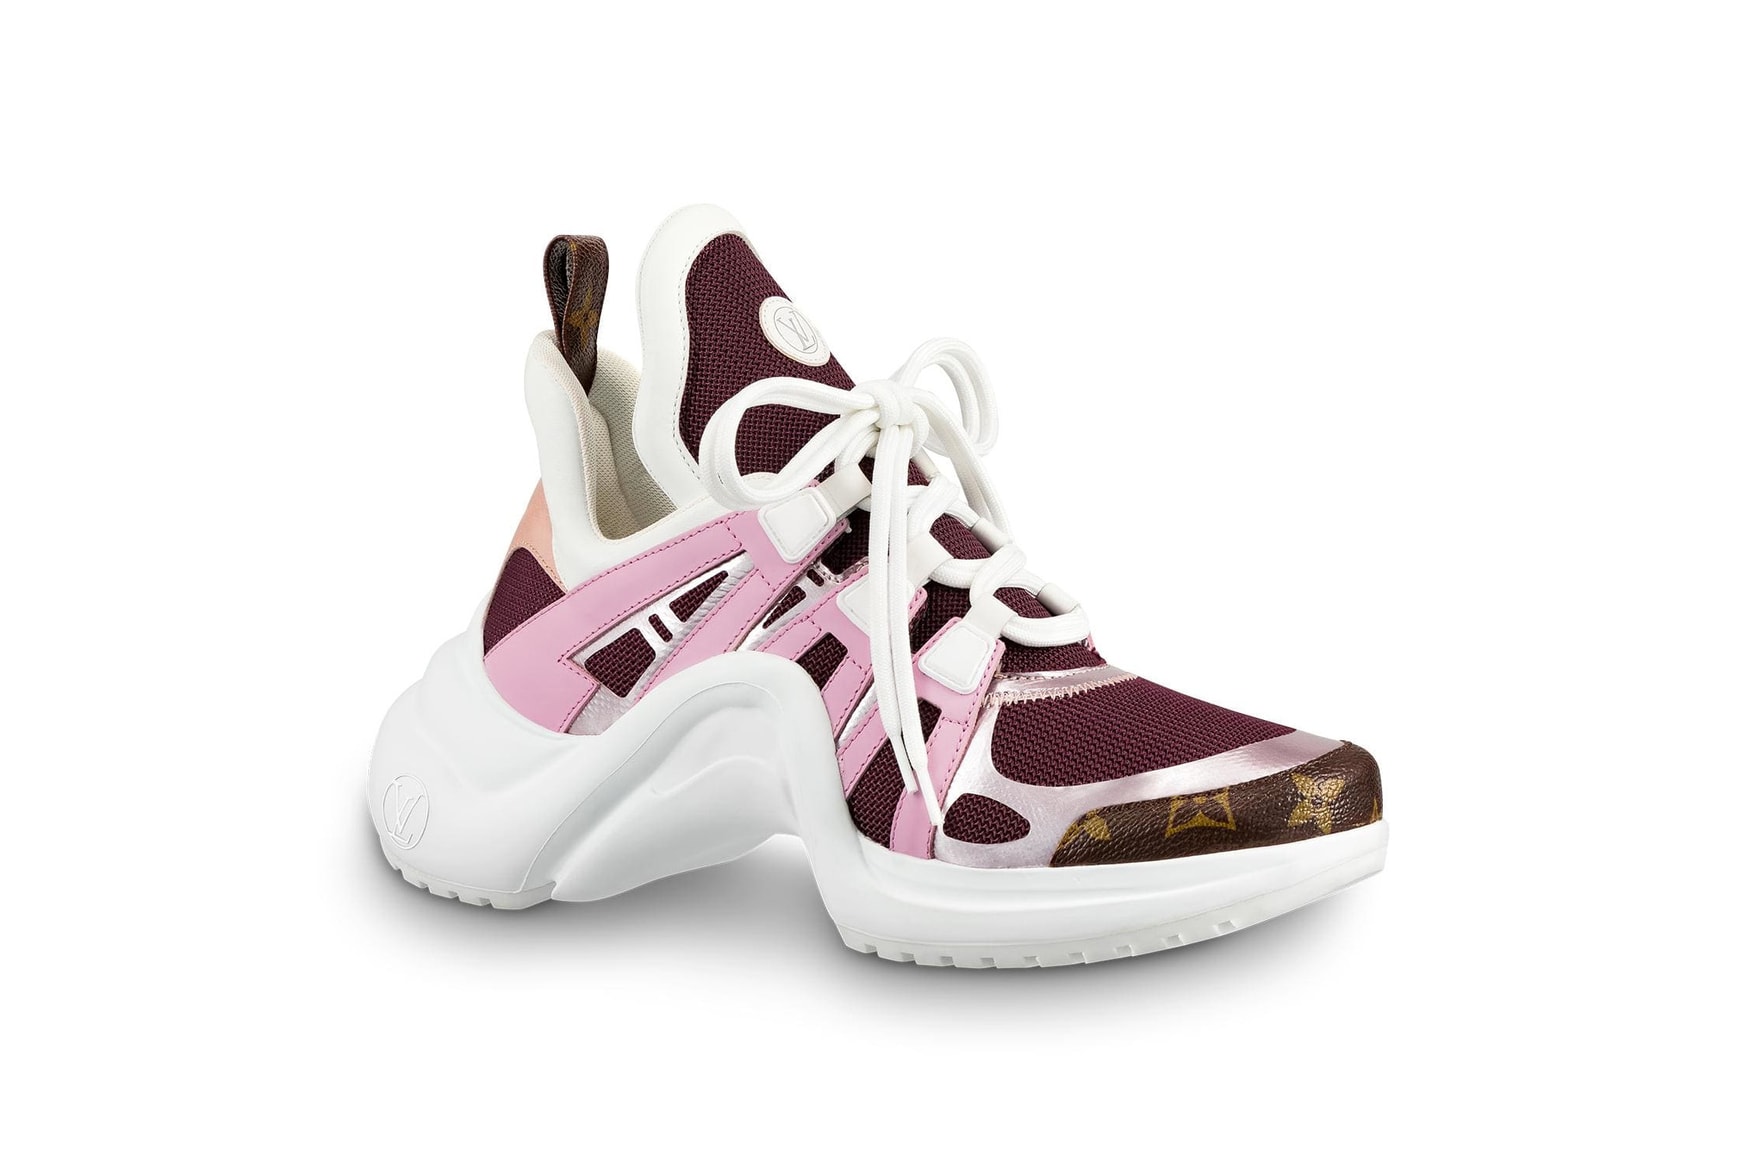 Louis Vuitton Archlight Sneakers Pink Black Gold Red Metallic White Sole Where to Buy